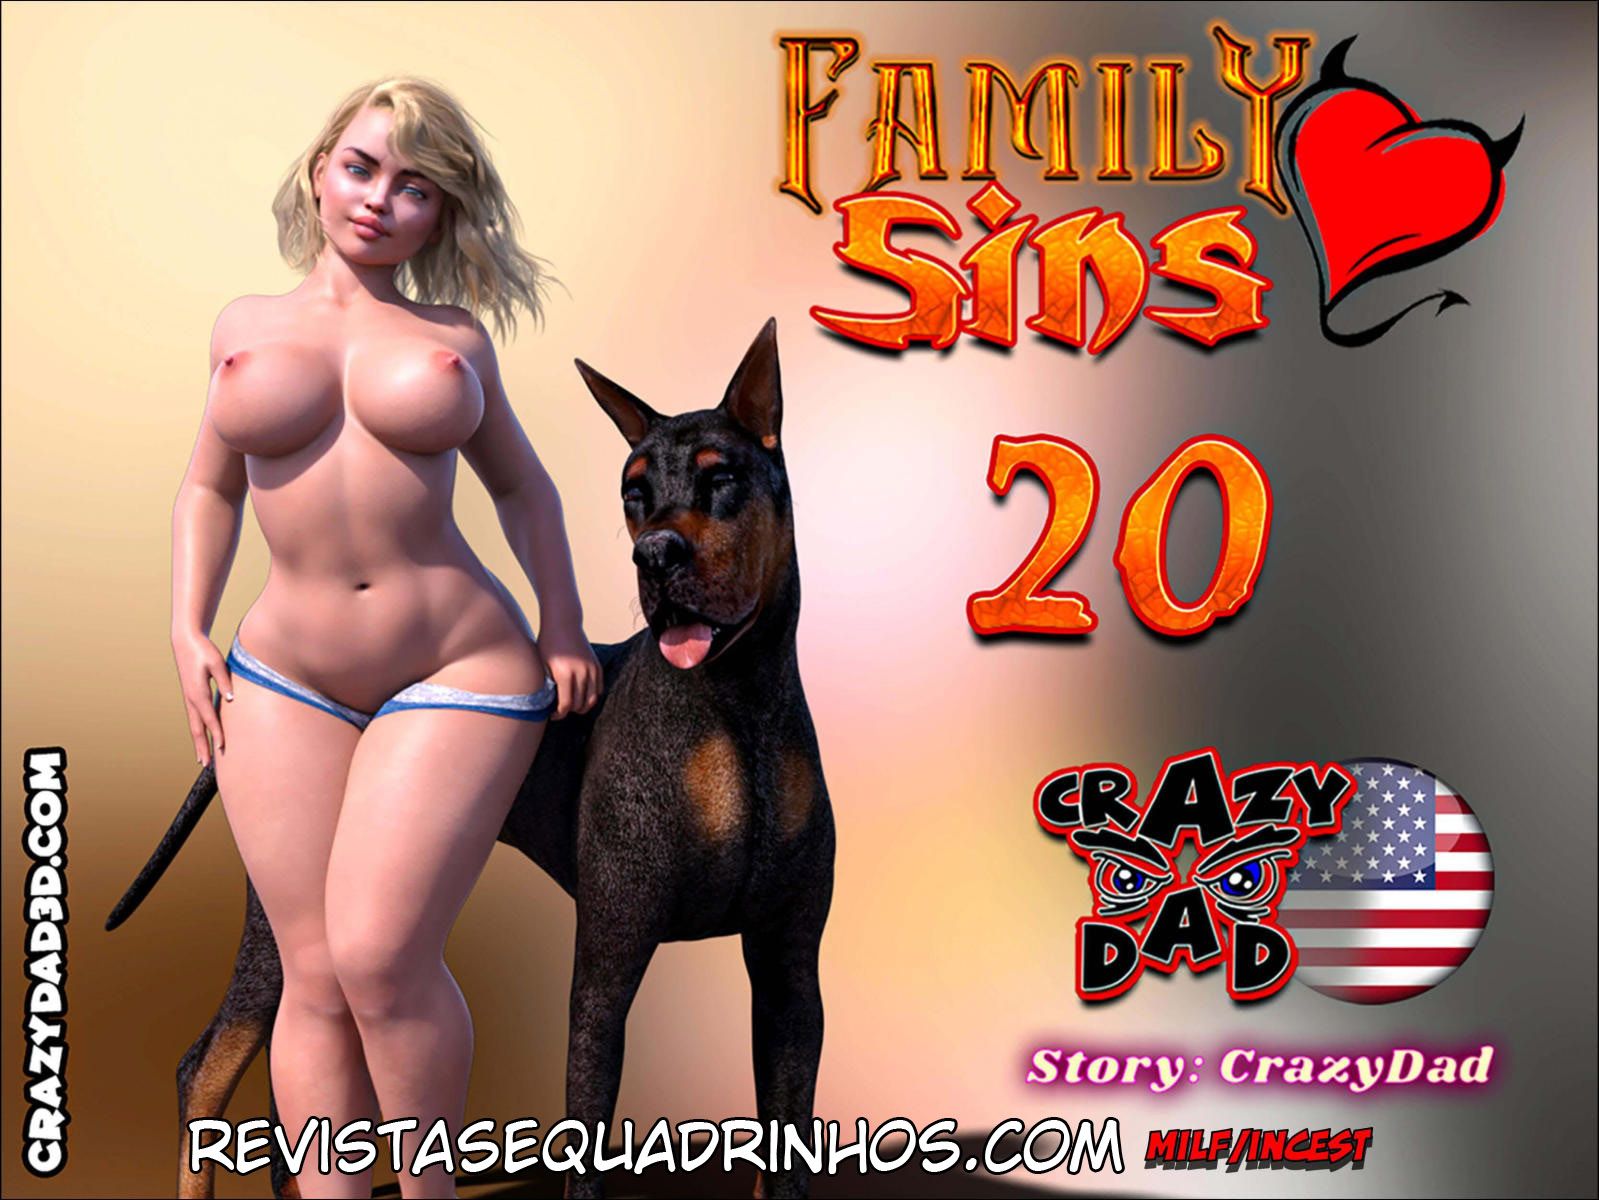 Family Sins 20 by Crazy Dad Completo!